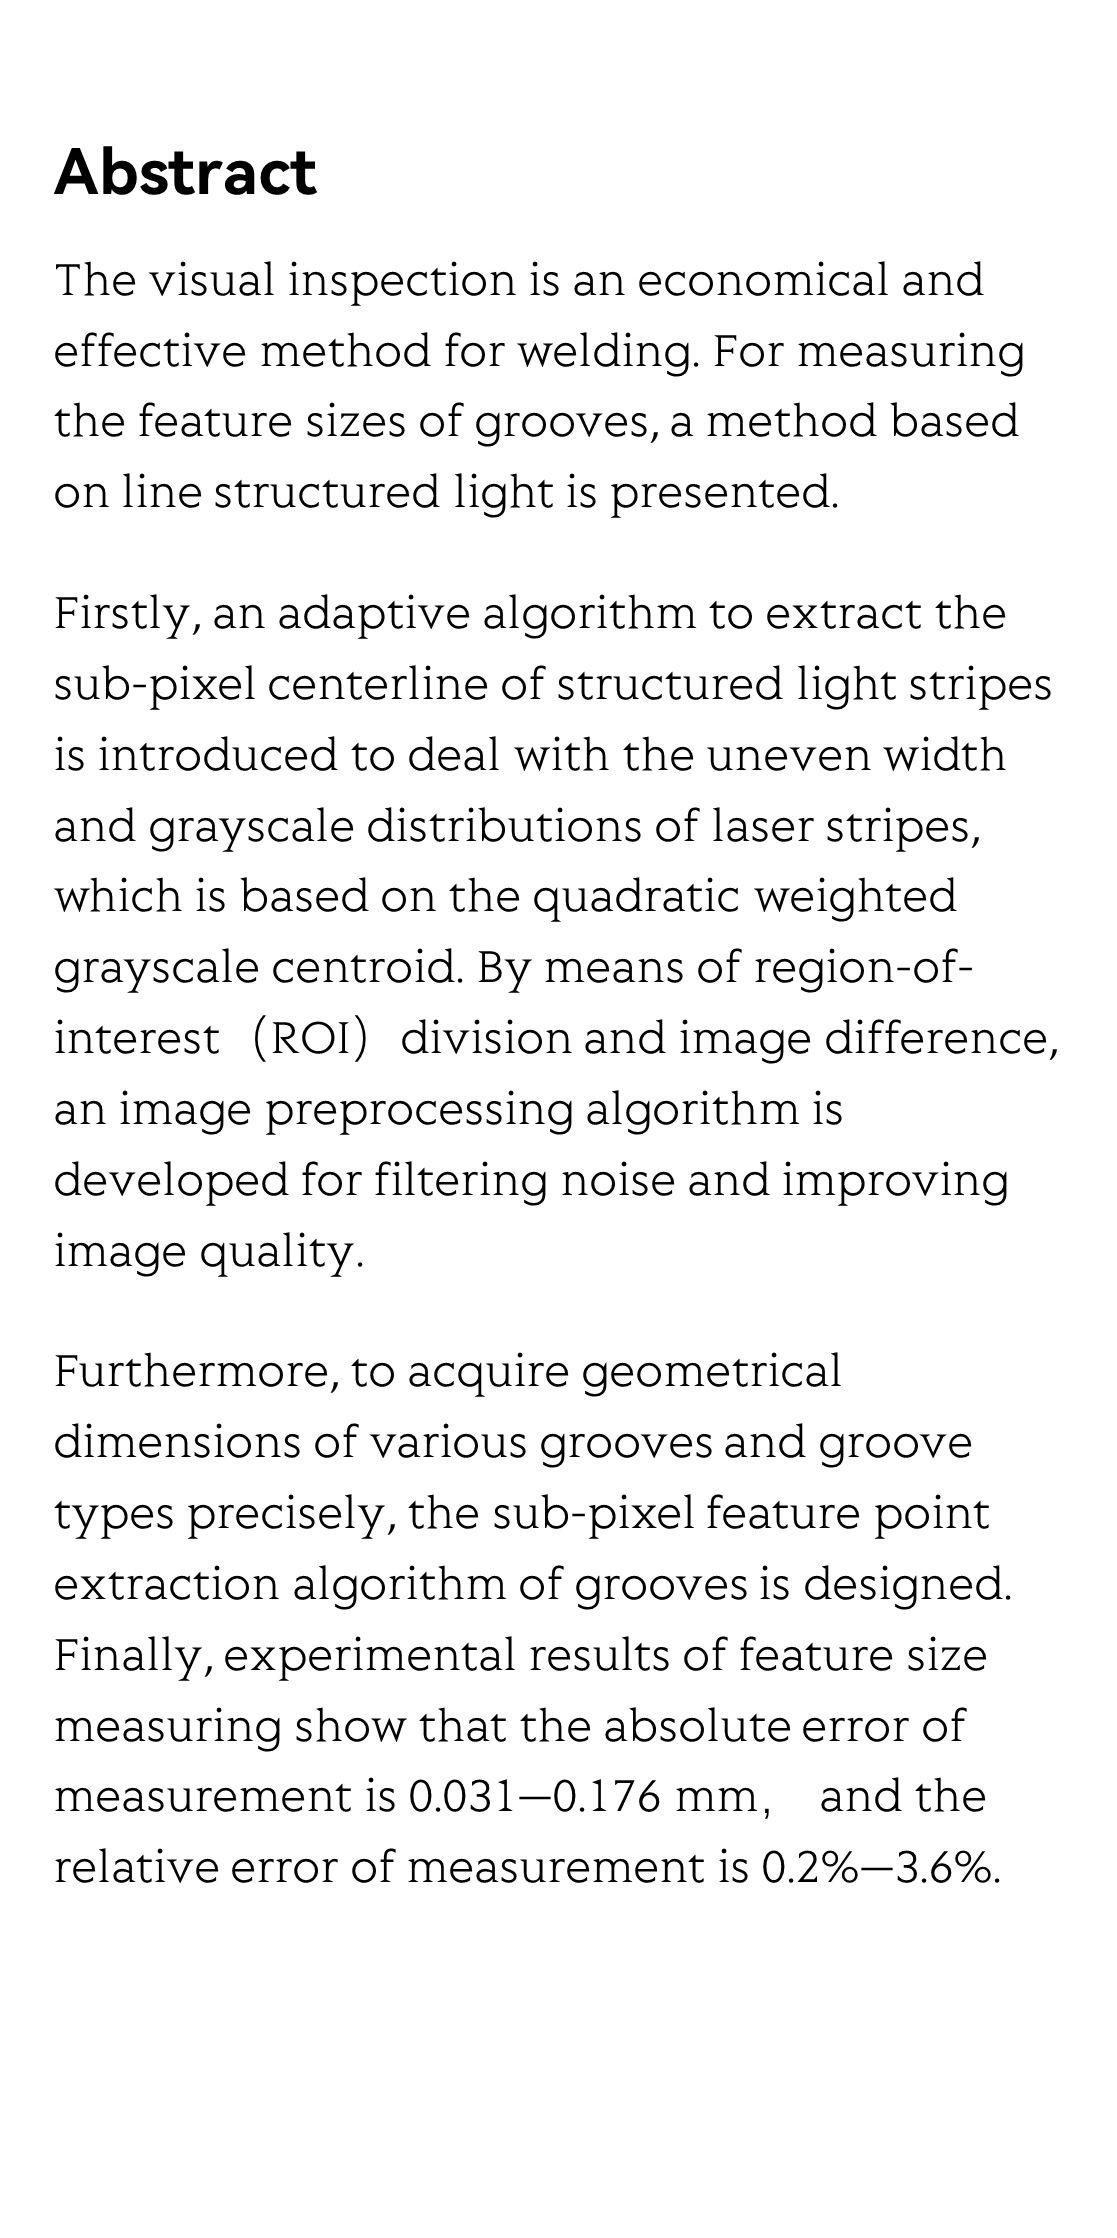 Research on Visual Detection Algorithm for Groove Feature Sizes by Means of Structured Light Projection_2